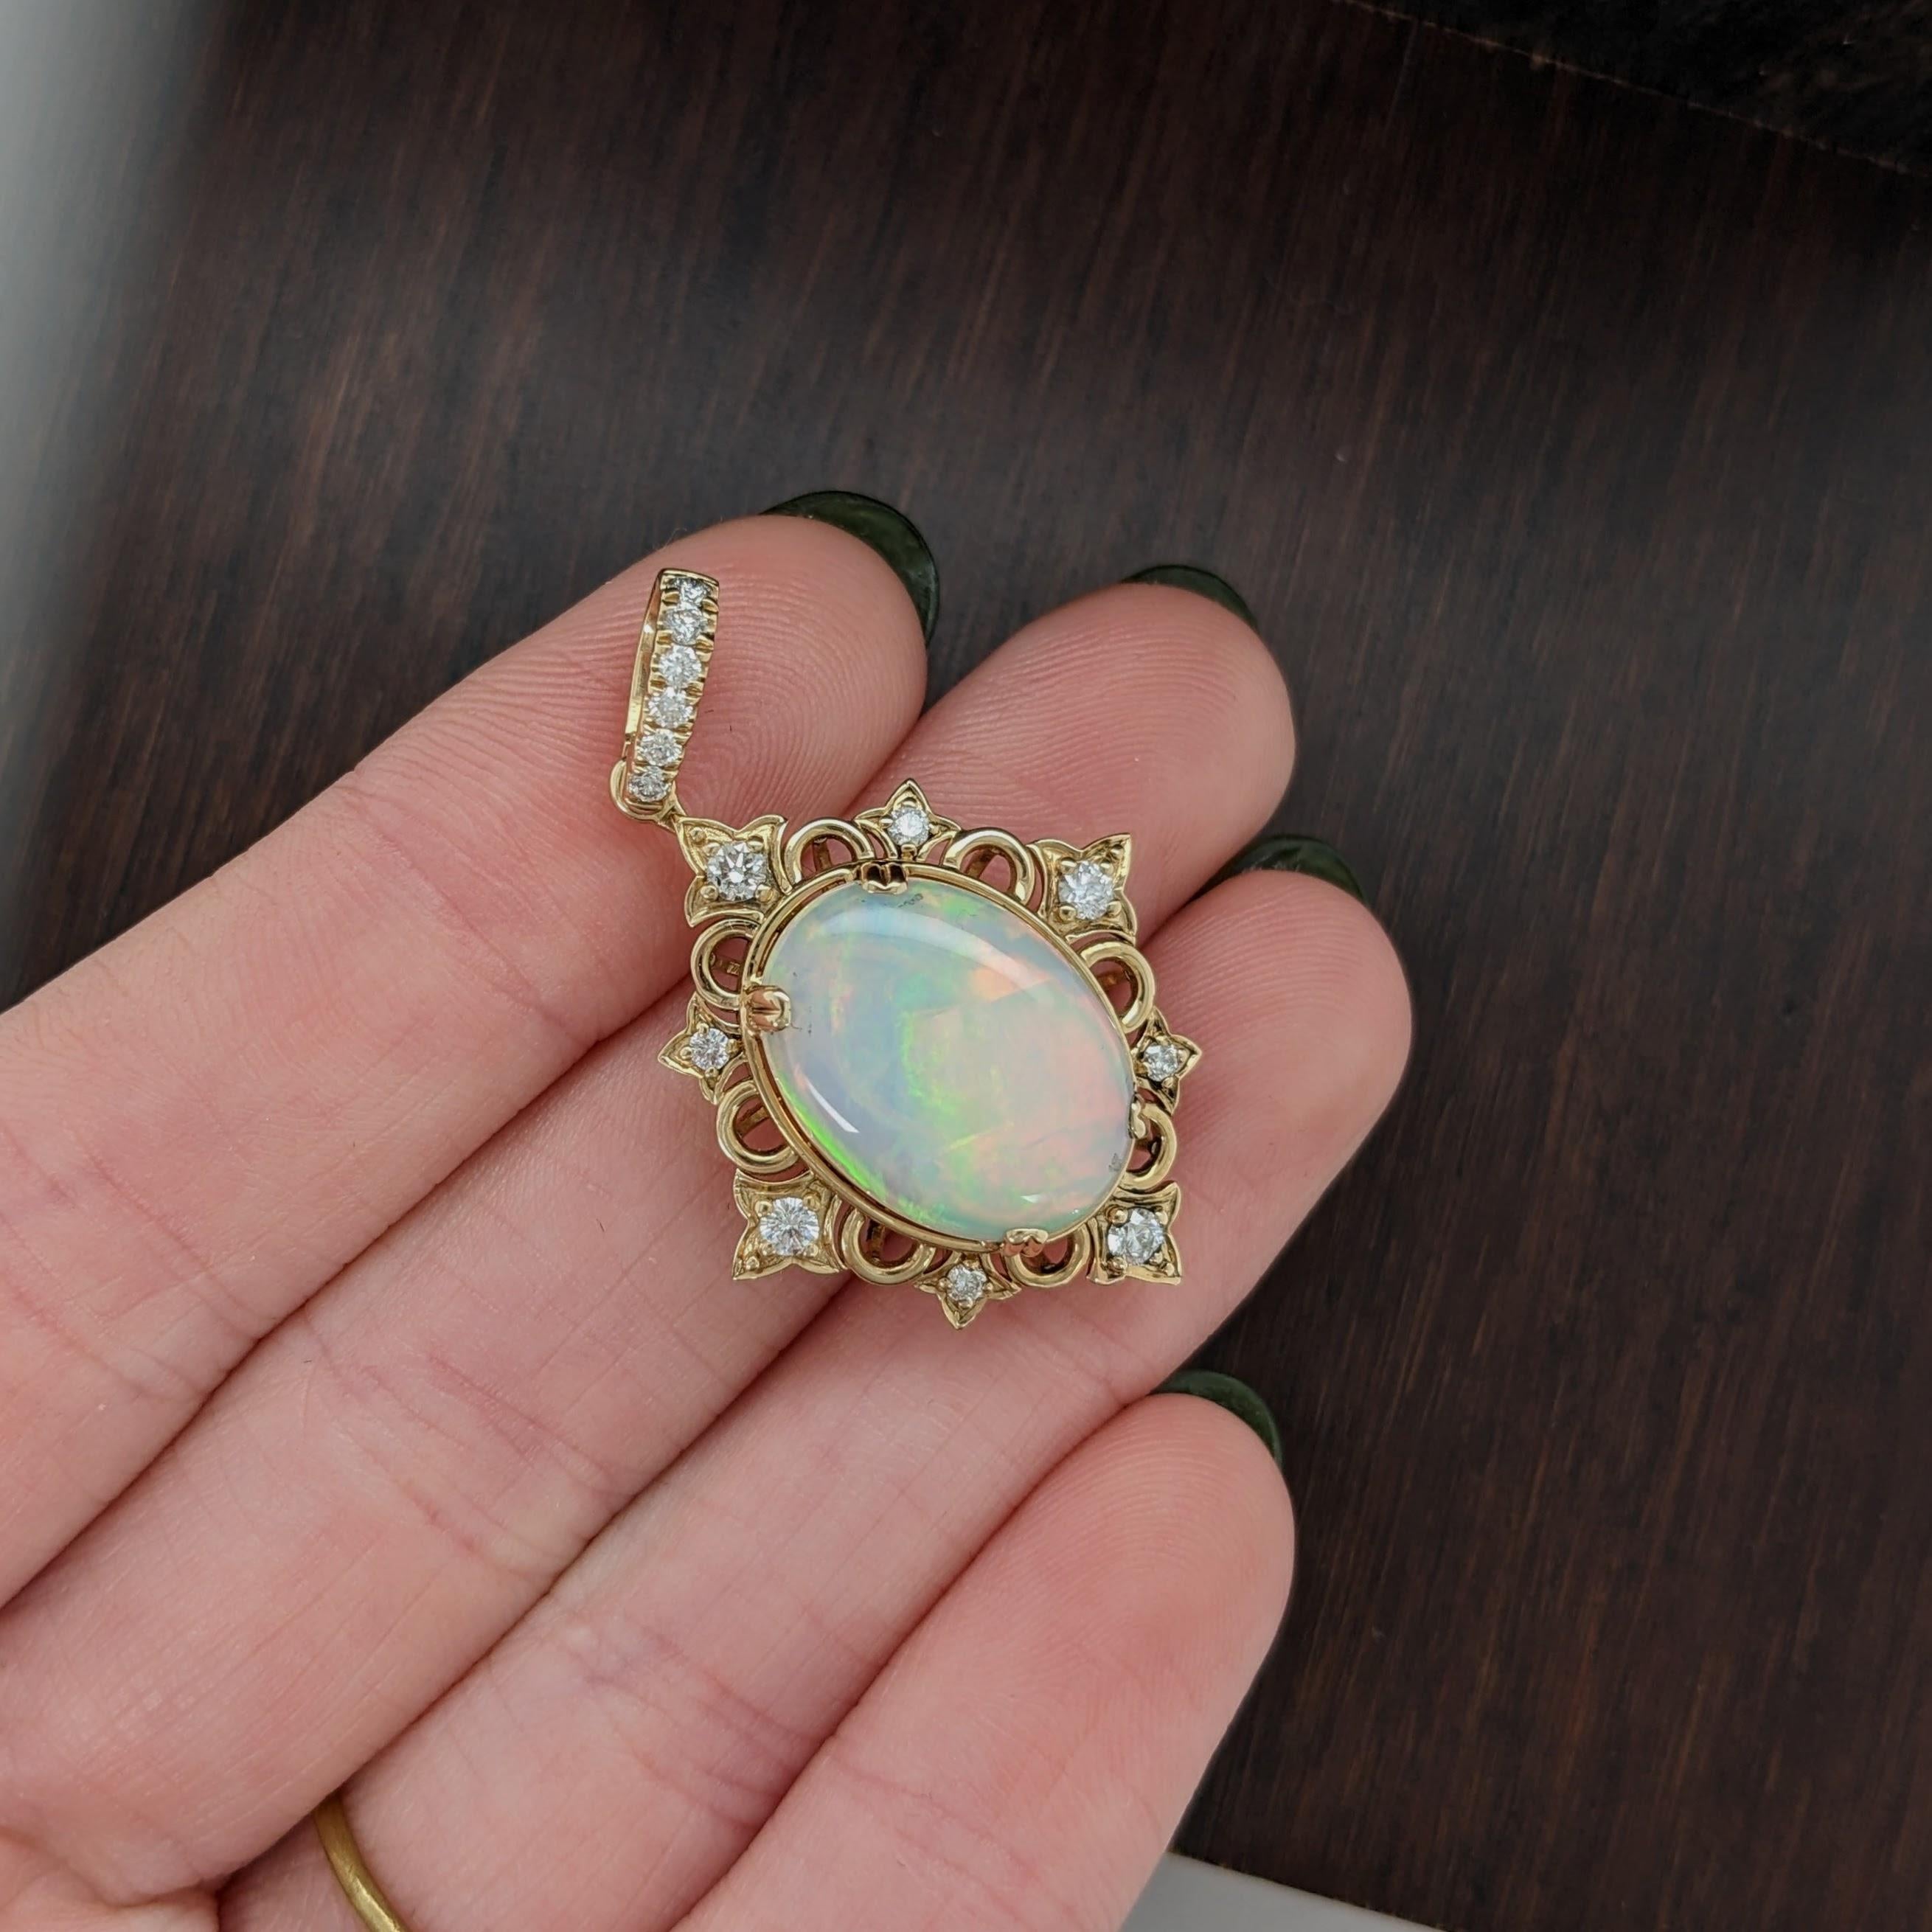 4.57ct Opal Pendant w Diamond Accents in Solid 14k Yellow Gold Oval 16.7x12.3mm 3